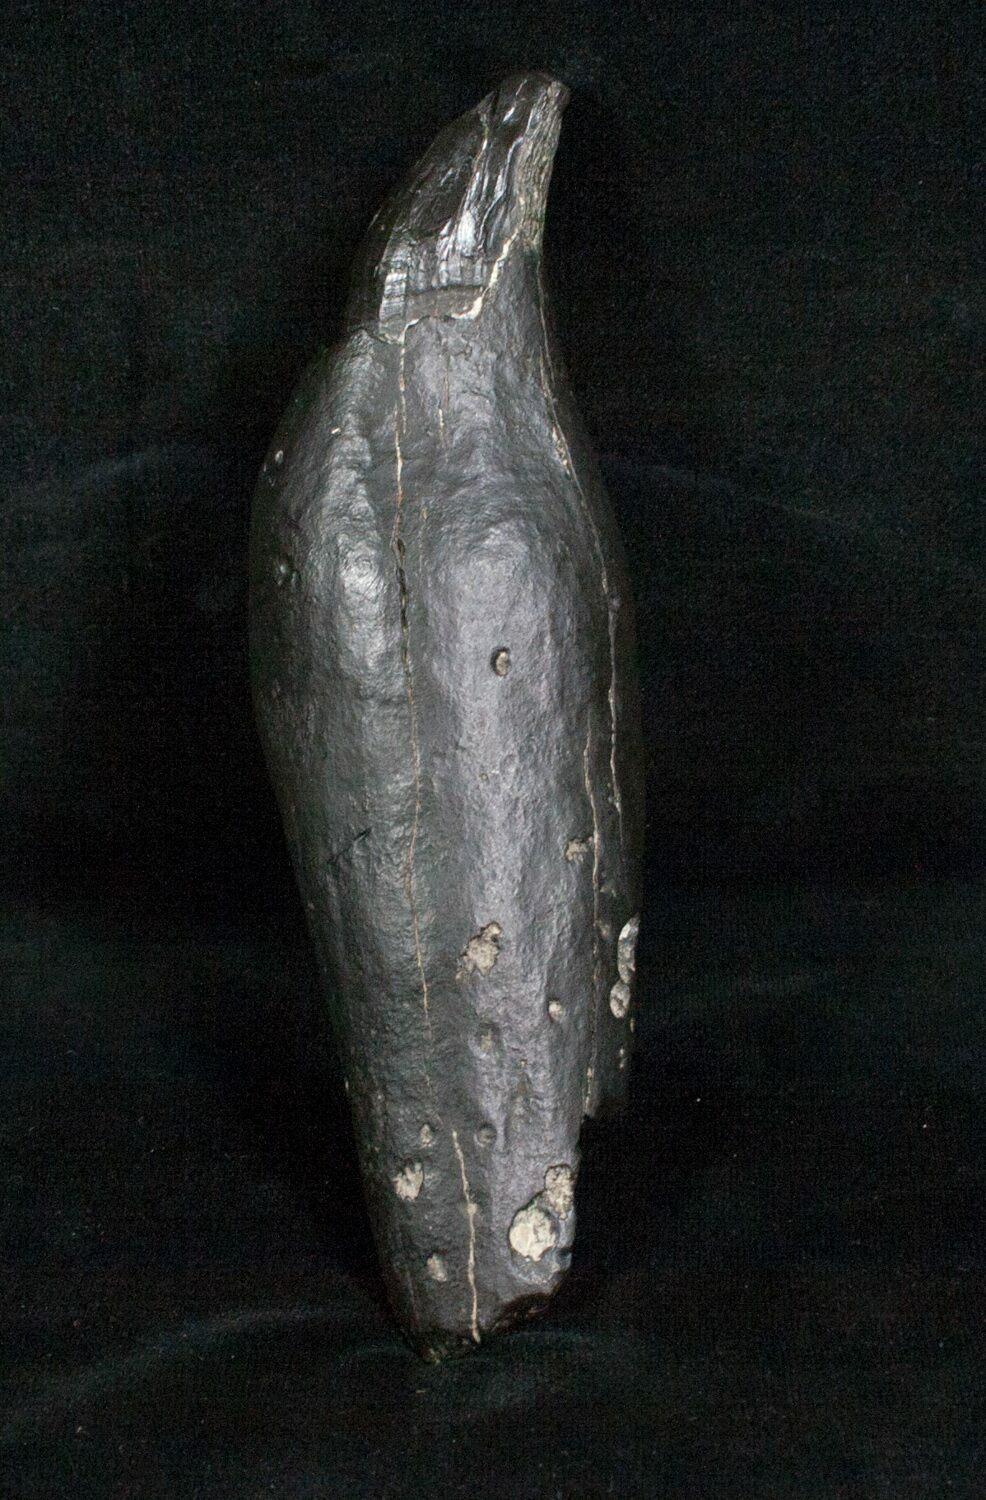 Large Fossil Sperm Whale Tooth - 5 1/2" (Miocene) For Sale (#4702